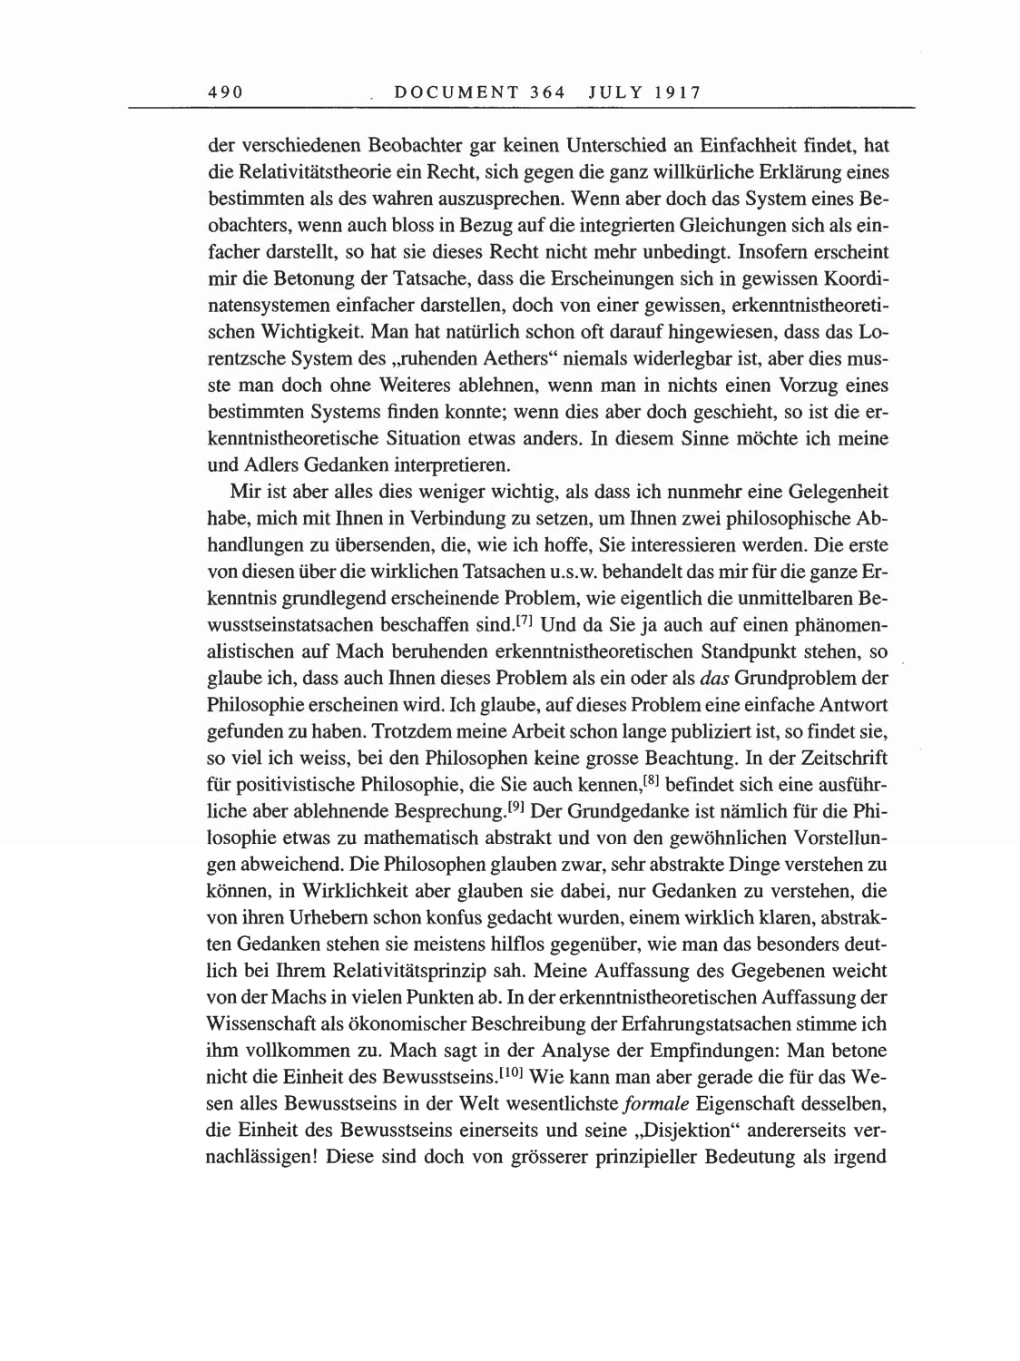 Volume 8, Part A: The Berlin Years: Correspondence 1914-1917 page 490